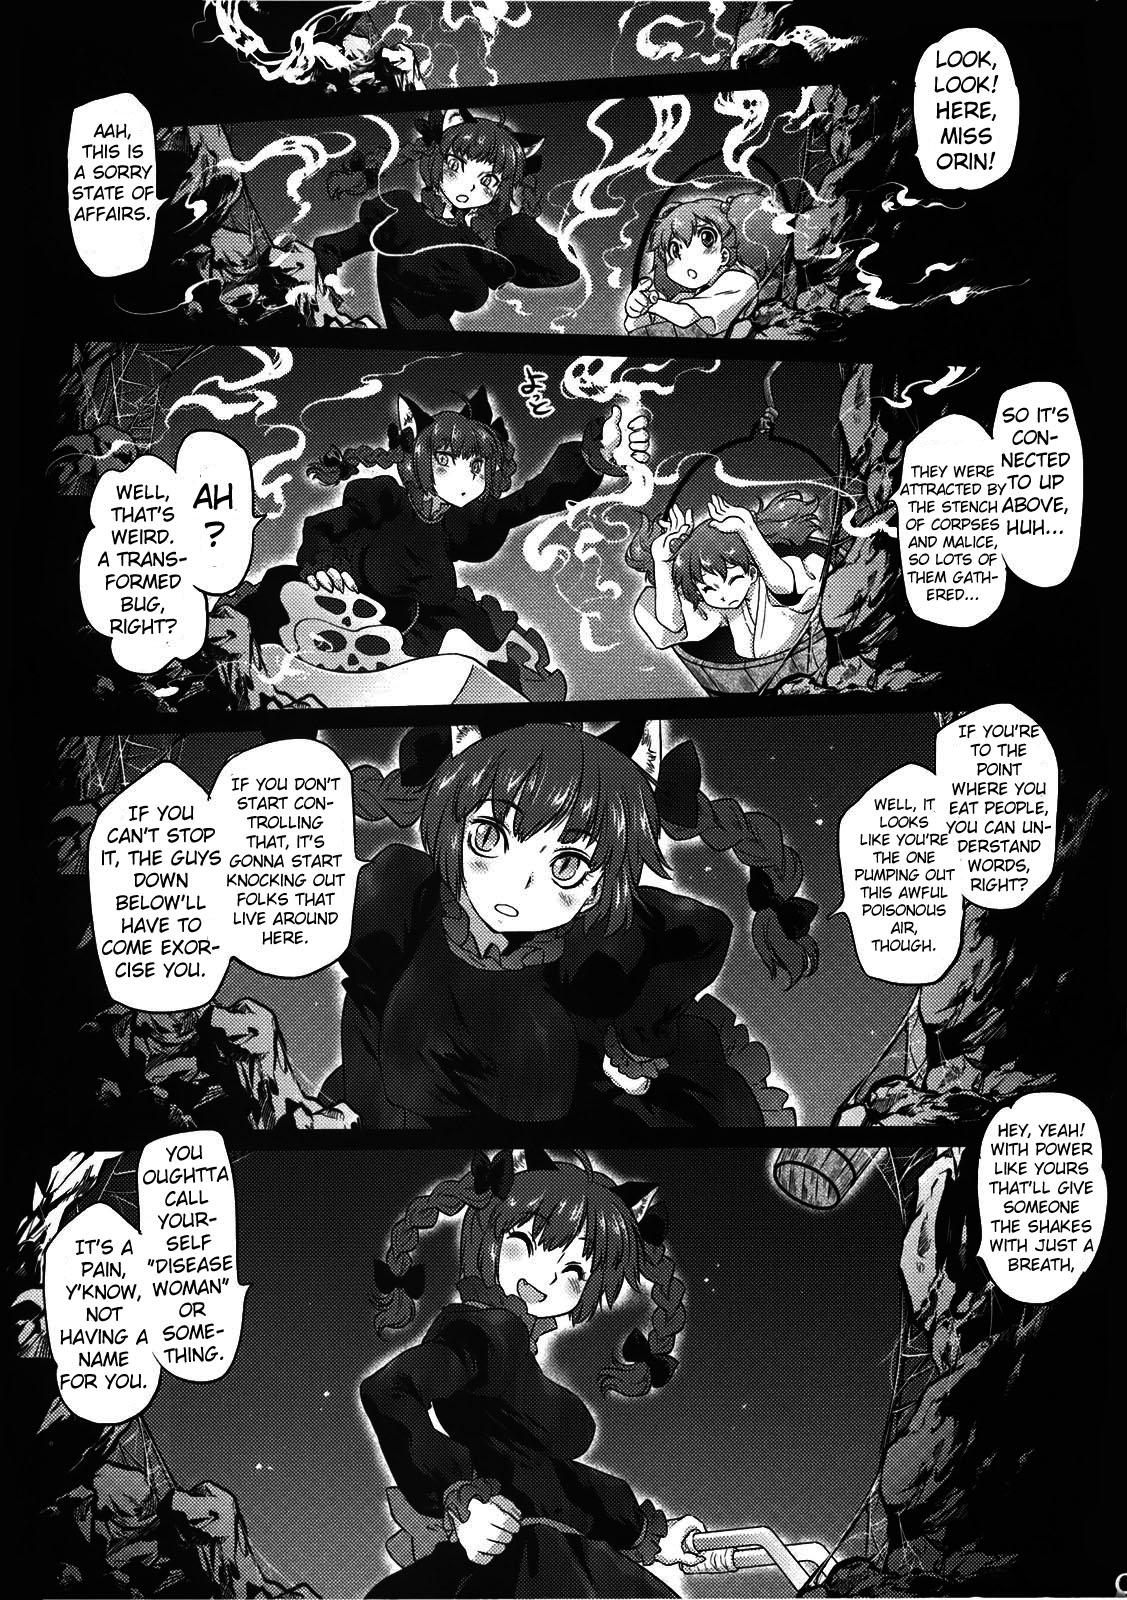 Foda A Disease Woman's Story - Touhou project Sex Party - Page 9